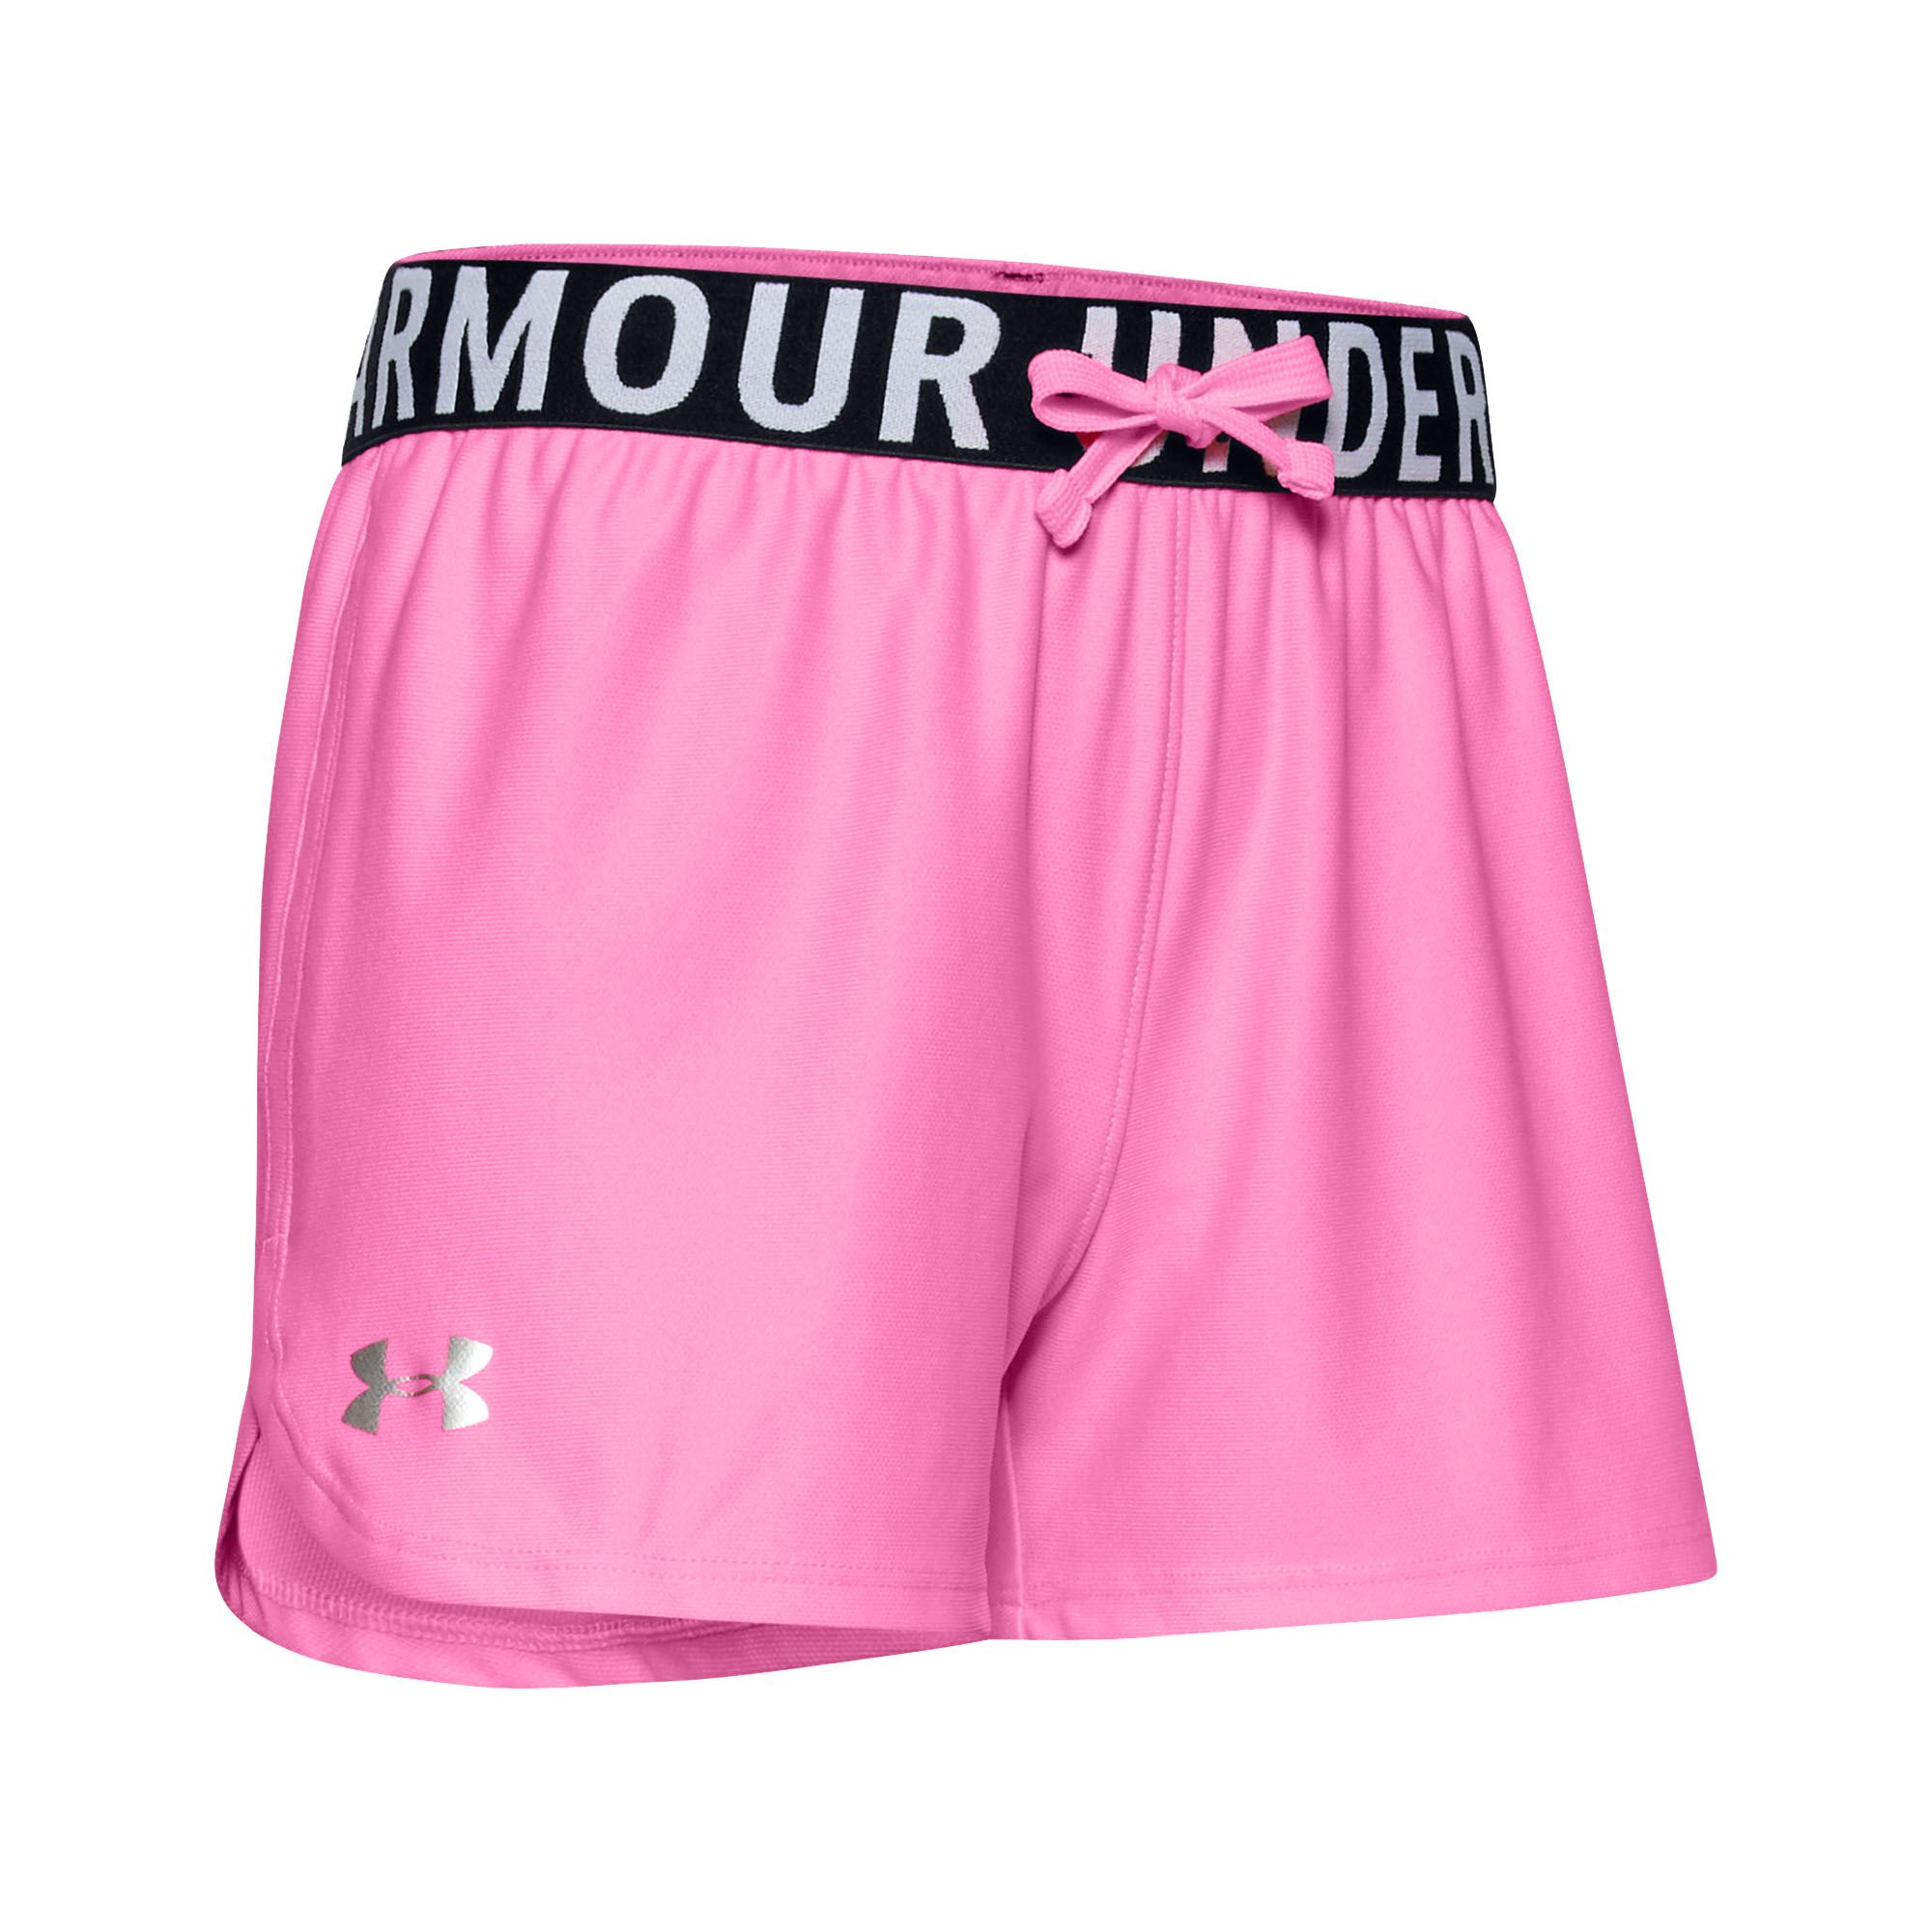 neon under armour shorts